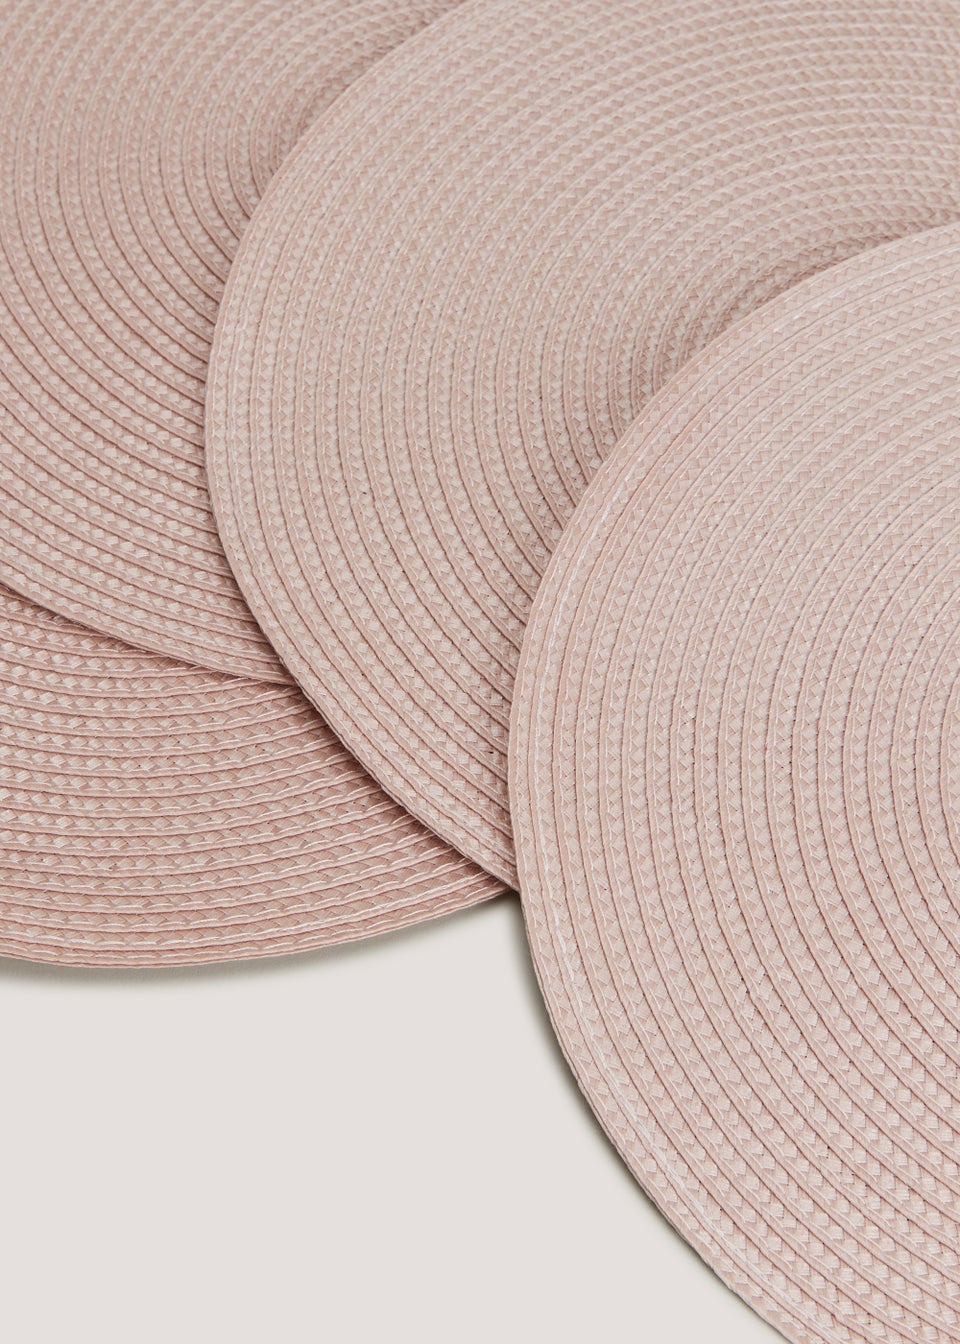 4 Pack Pink Woven Placemats (33cm)